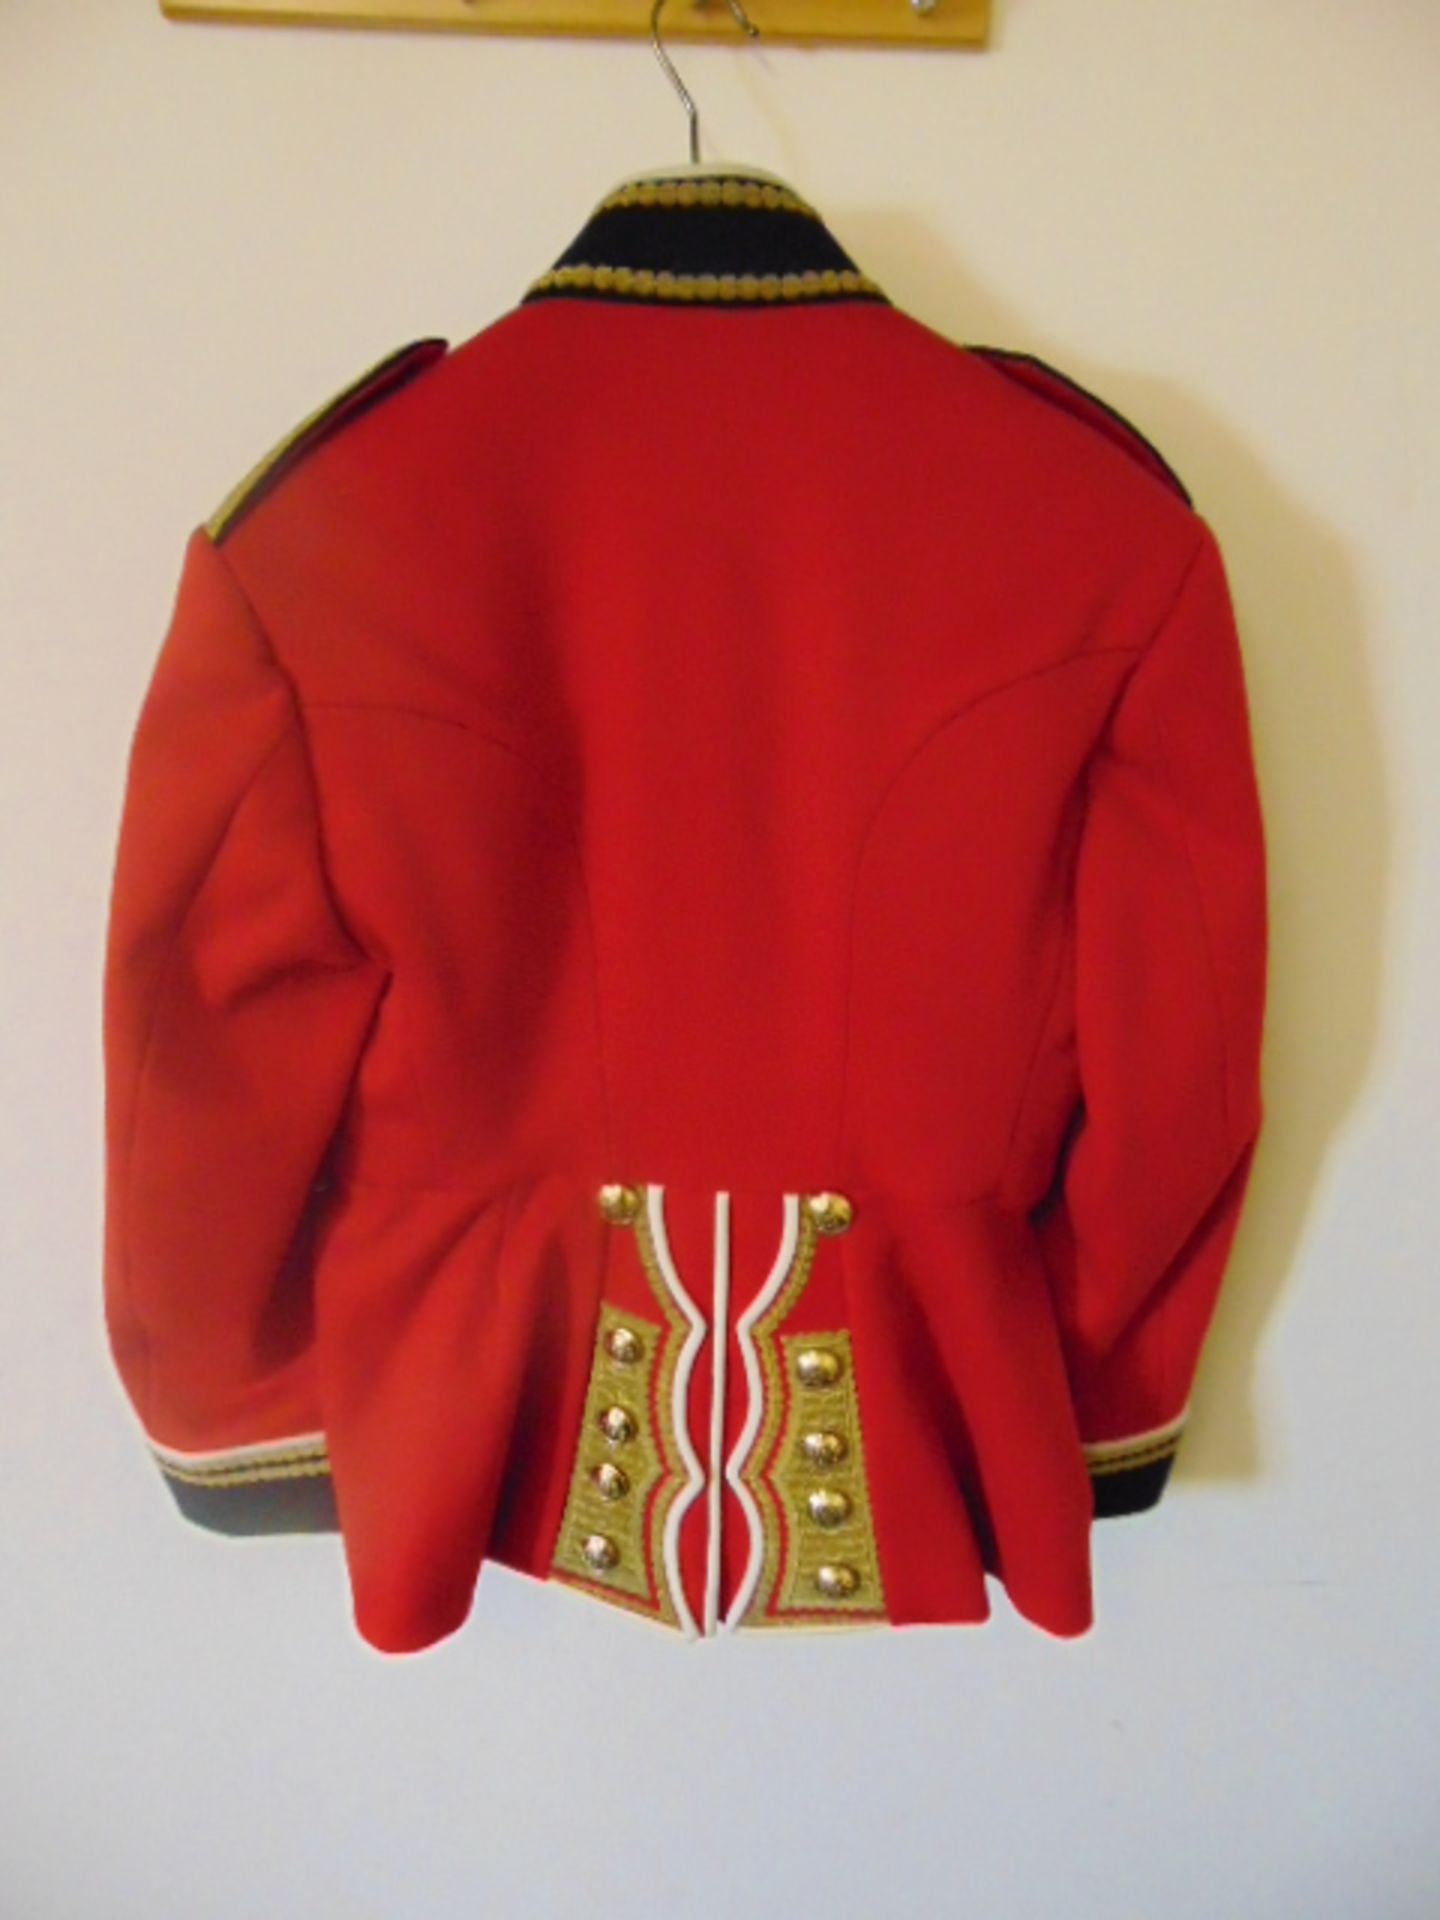 British Army Grenadier Guards Officers Ceremonial Tunic - Image 7 of 11